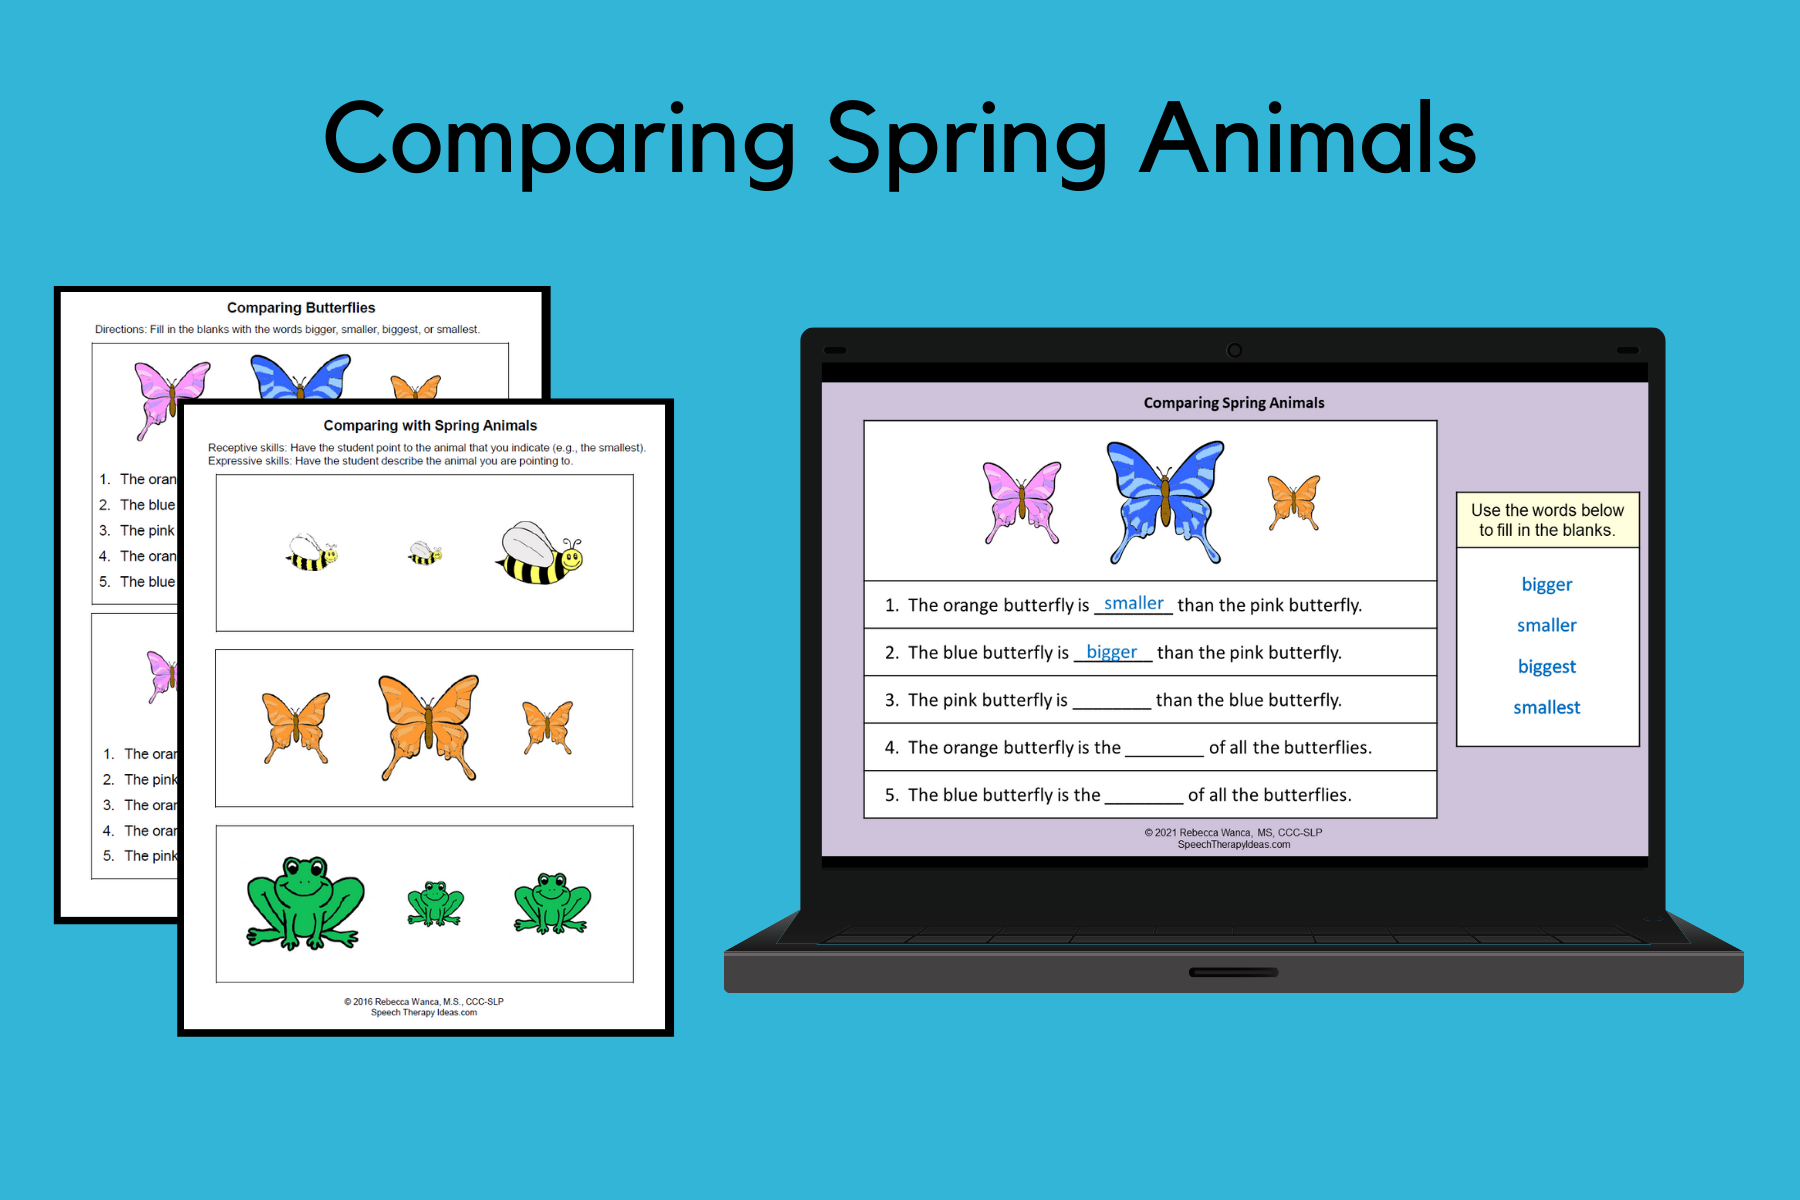 Comparing with Spring Animals